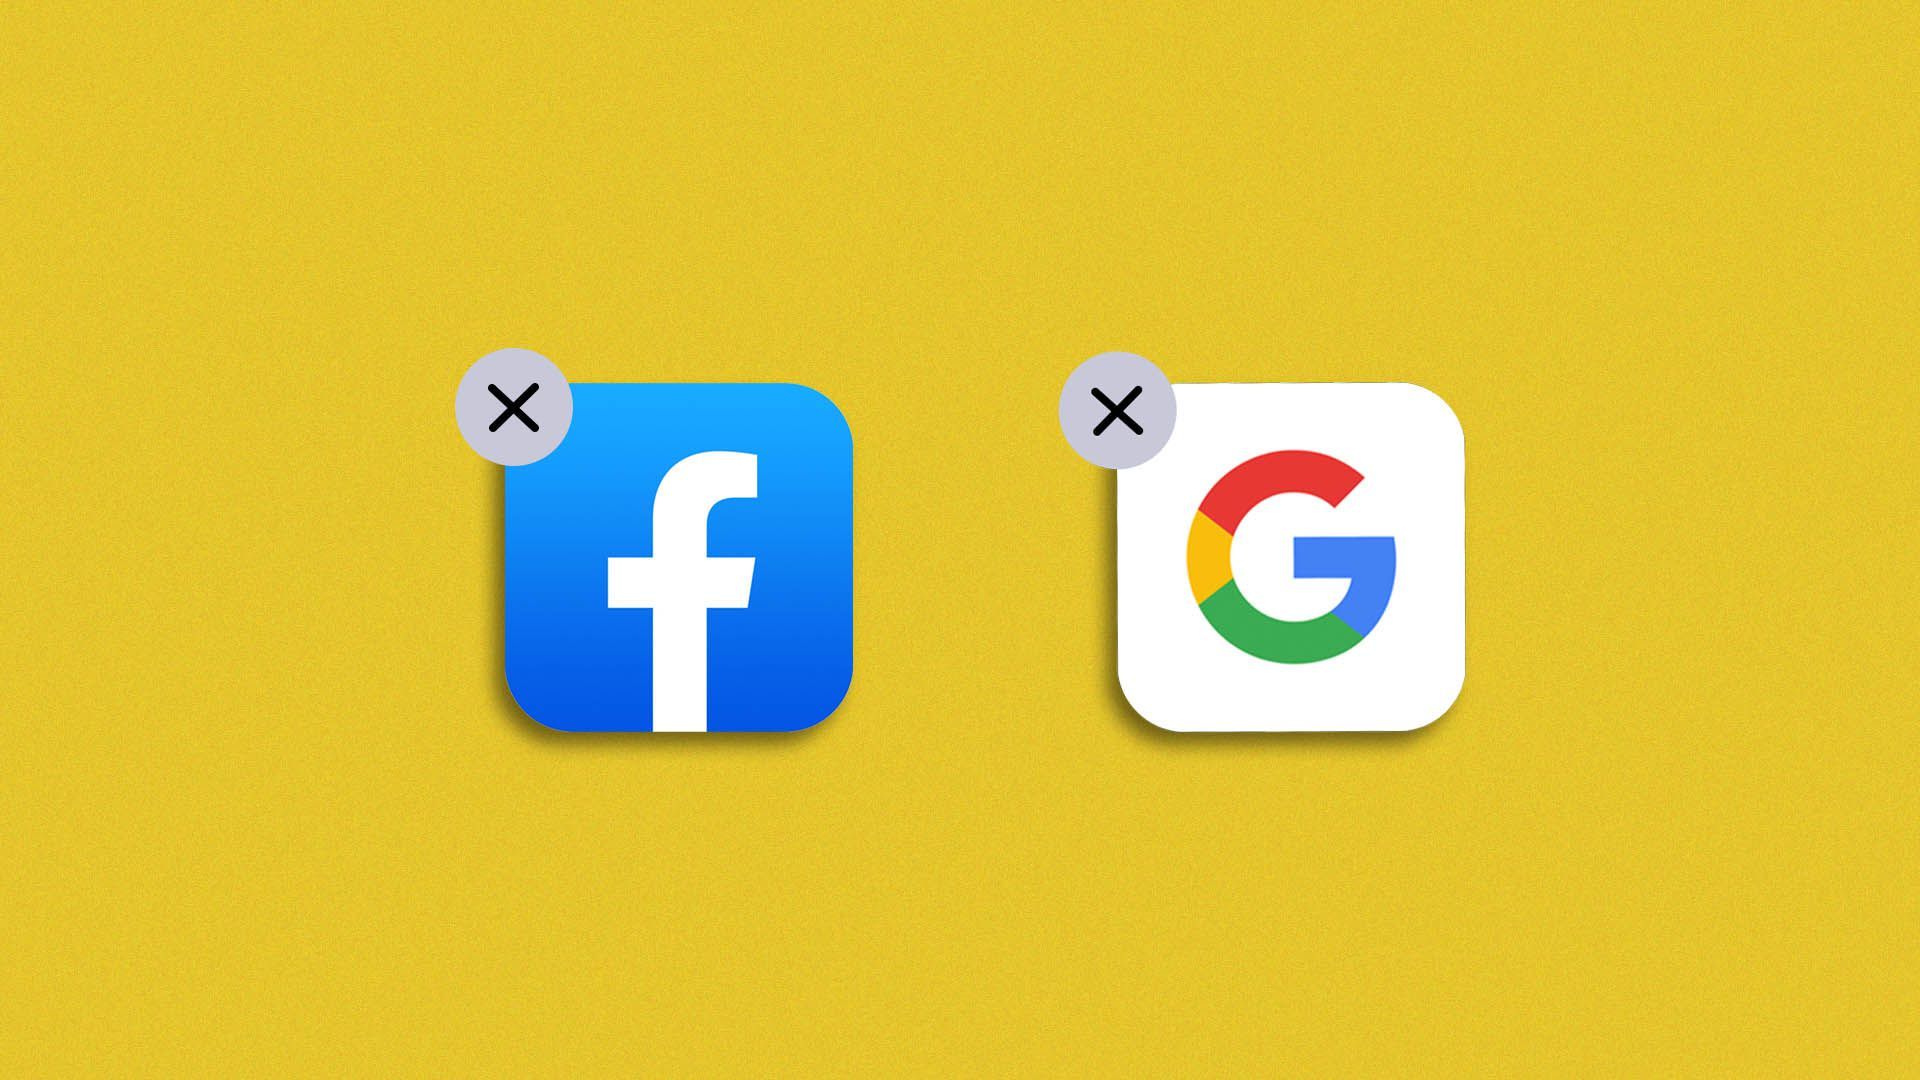 Illustration of Facebook and Google app about to be deleted.